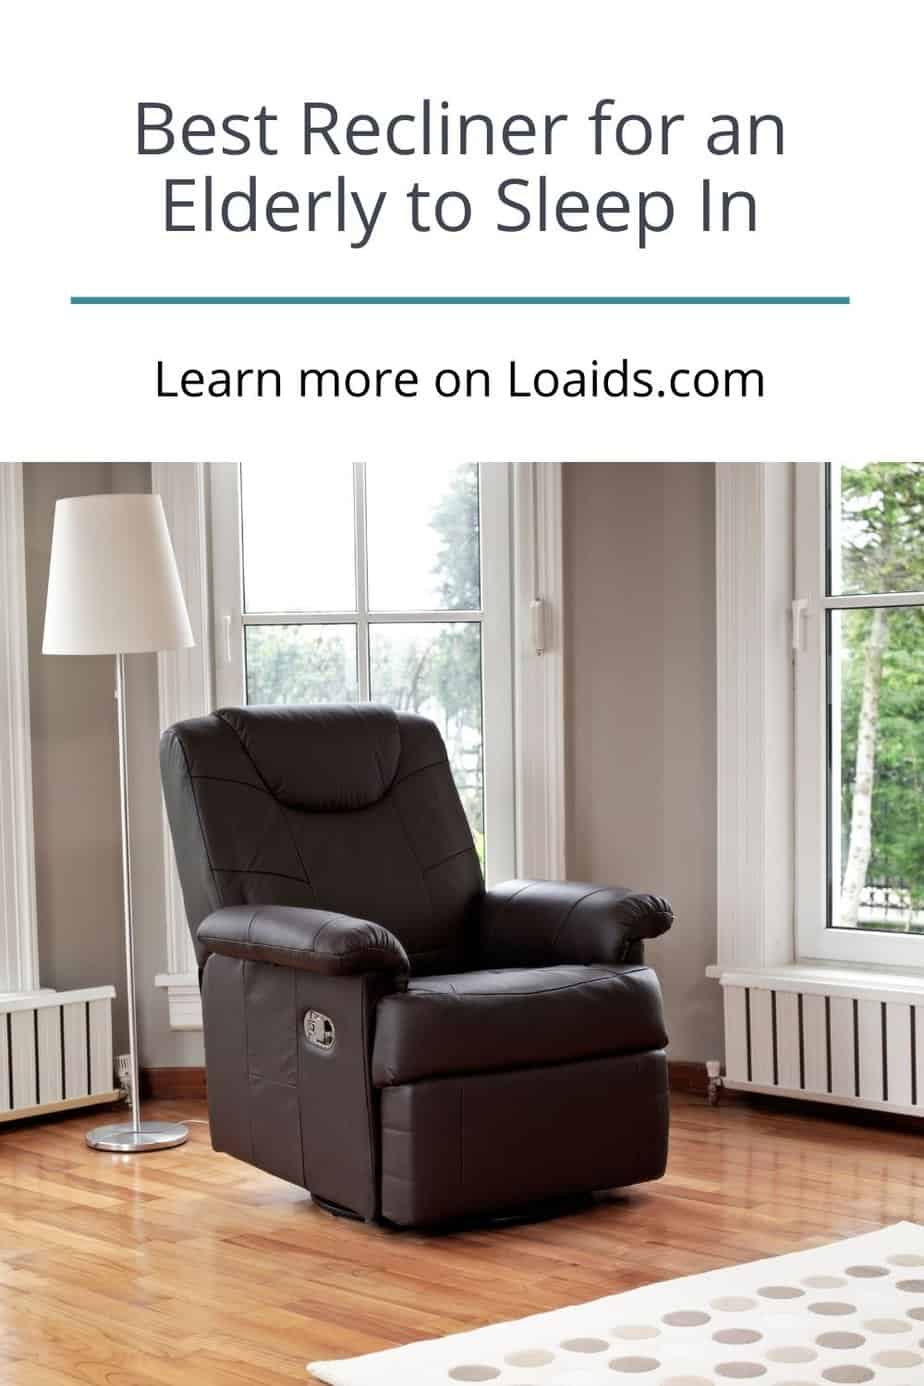 brown leather recliner under title Best Recliner for an Elderly to Sleep In